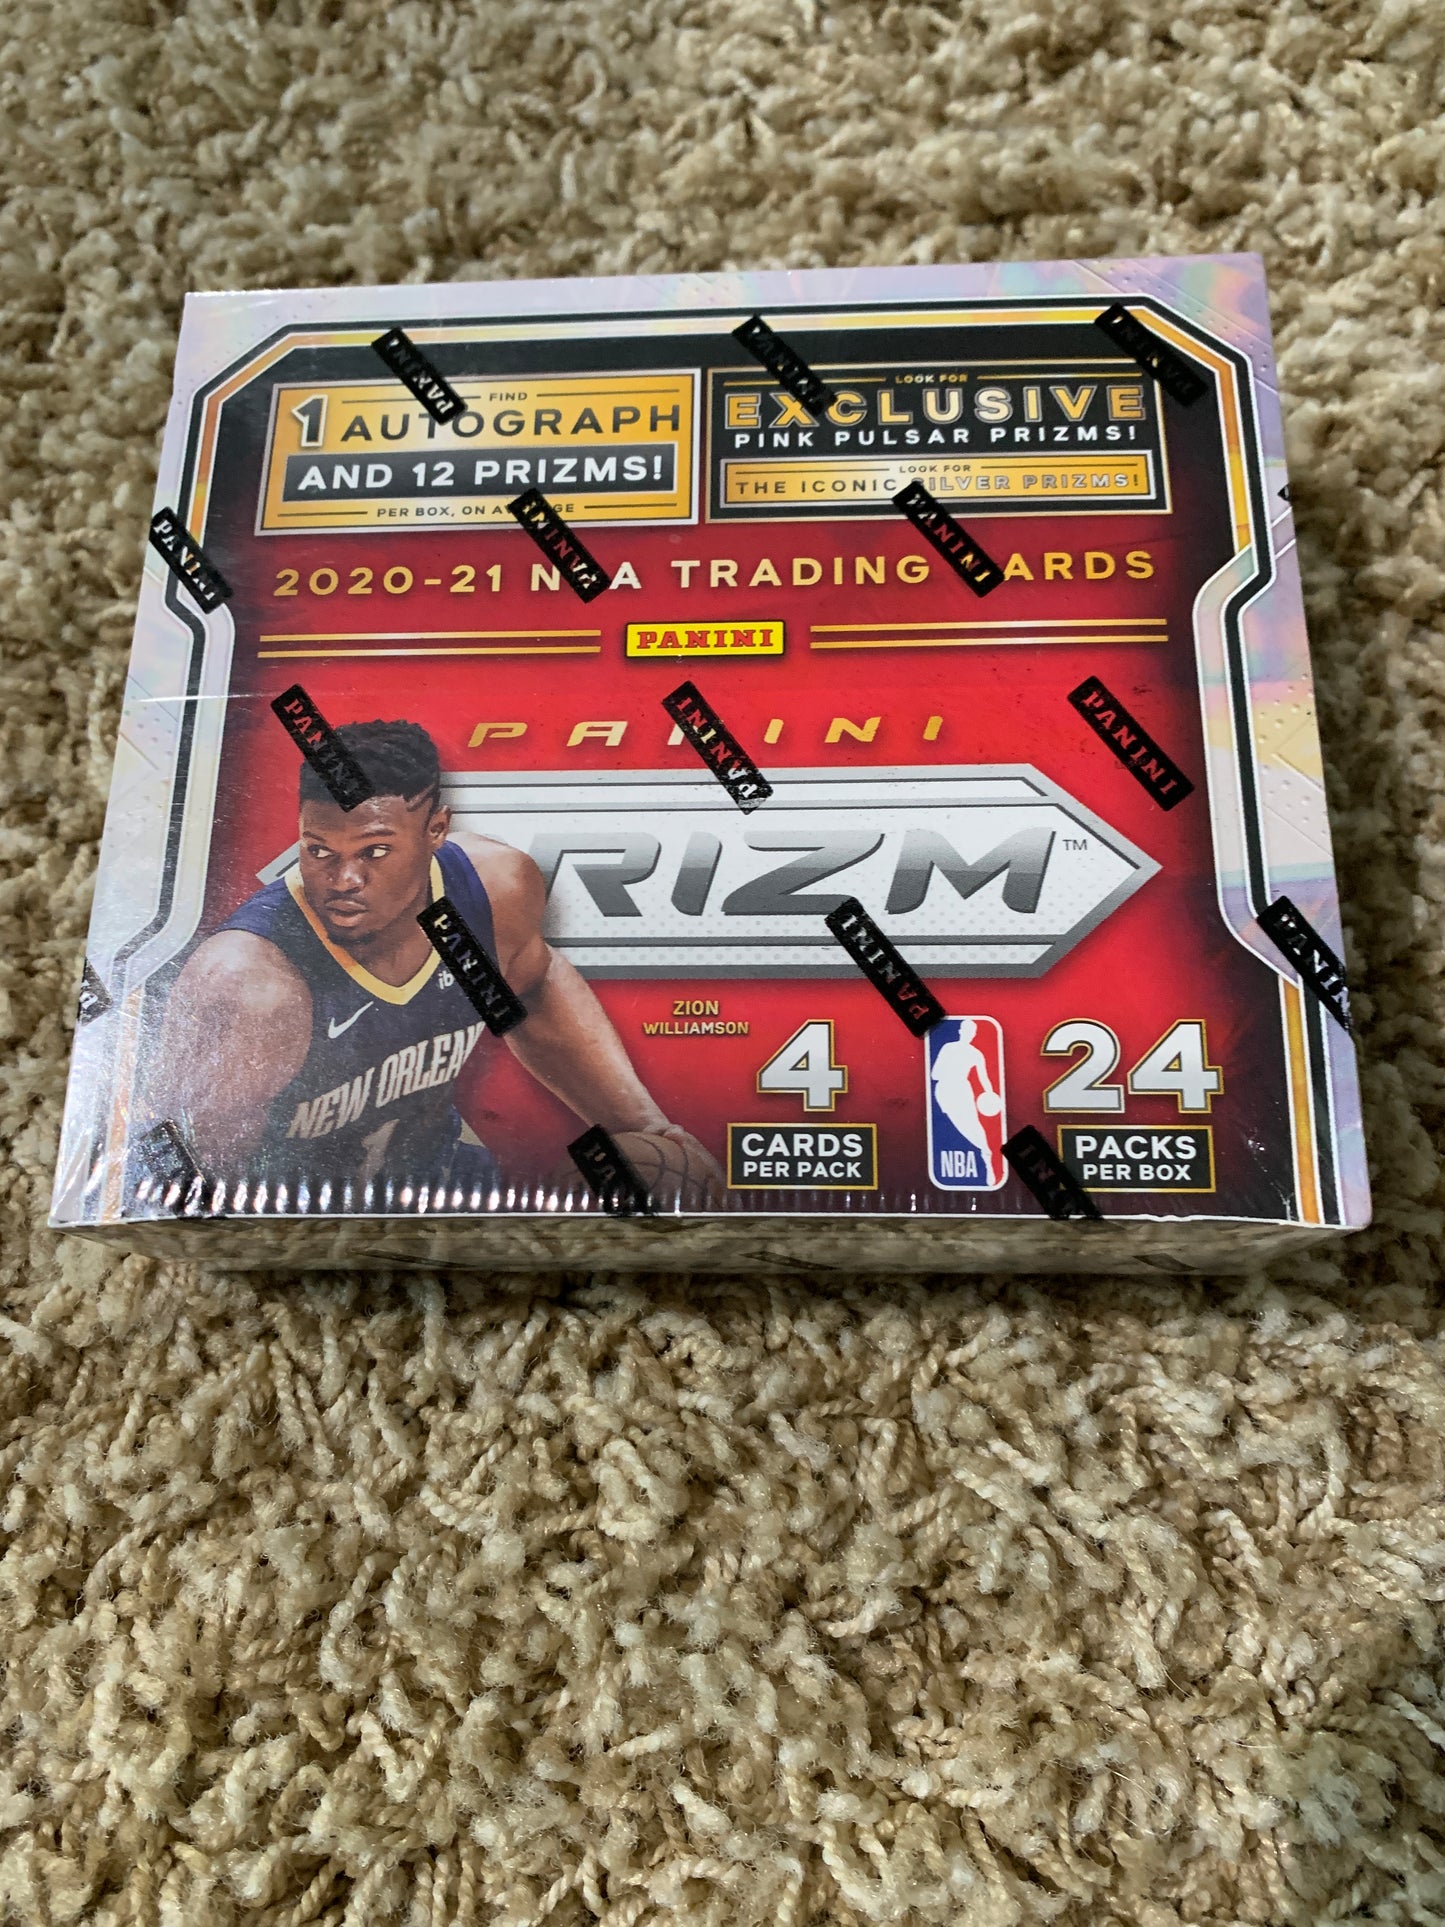 2020-2021 Panini Prizm Basketball Retail Box 1 auto possible per box, search for rookies Lamelo Ball, Wiseman and Pink Pulsar Prizms